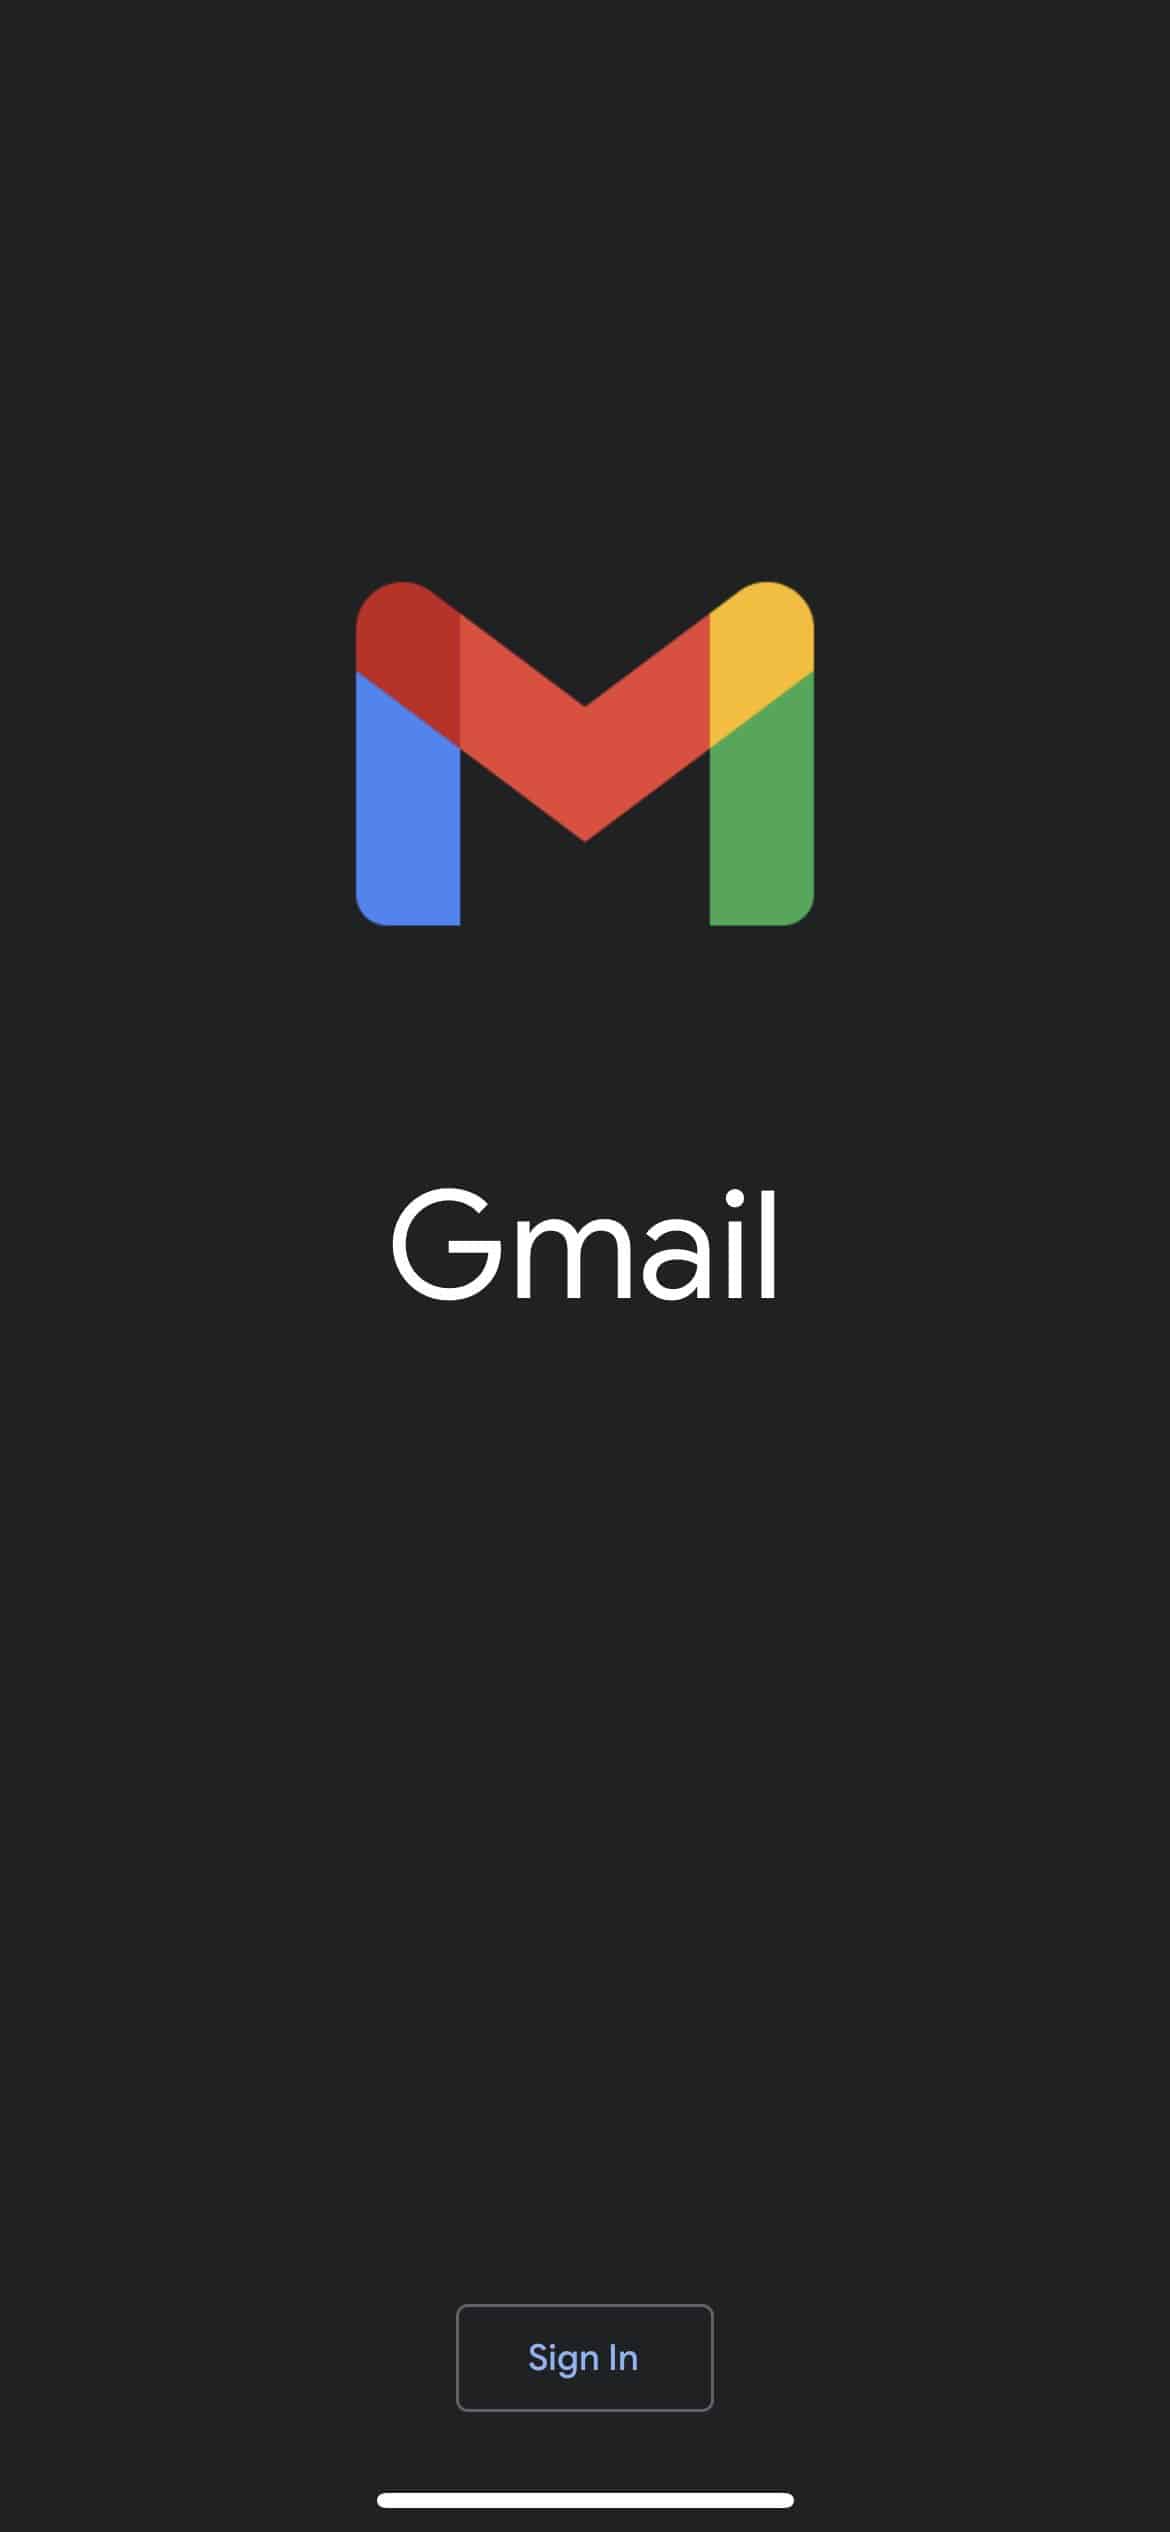 How to Remove a Gmail Account on iPhone (with Photos)